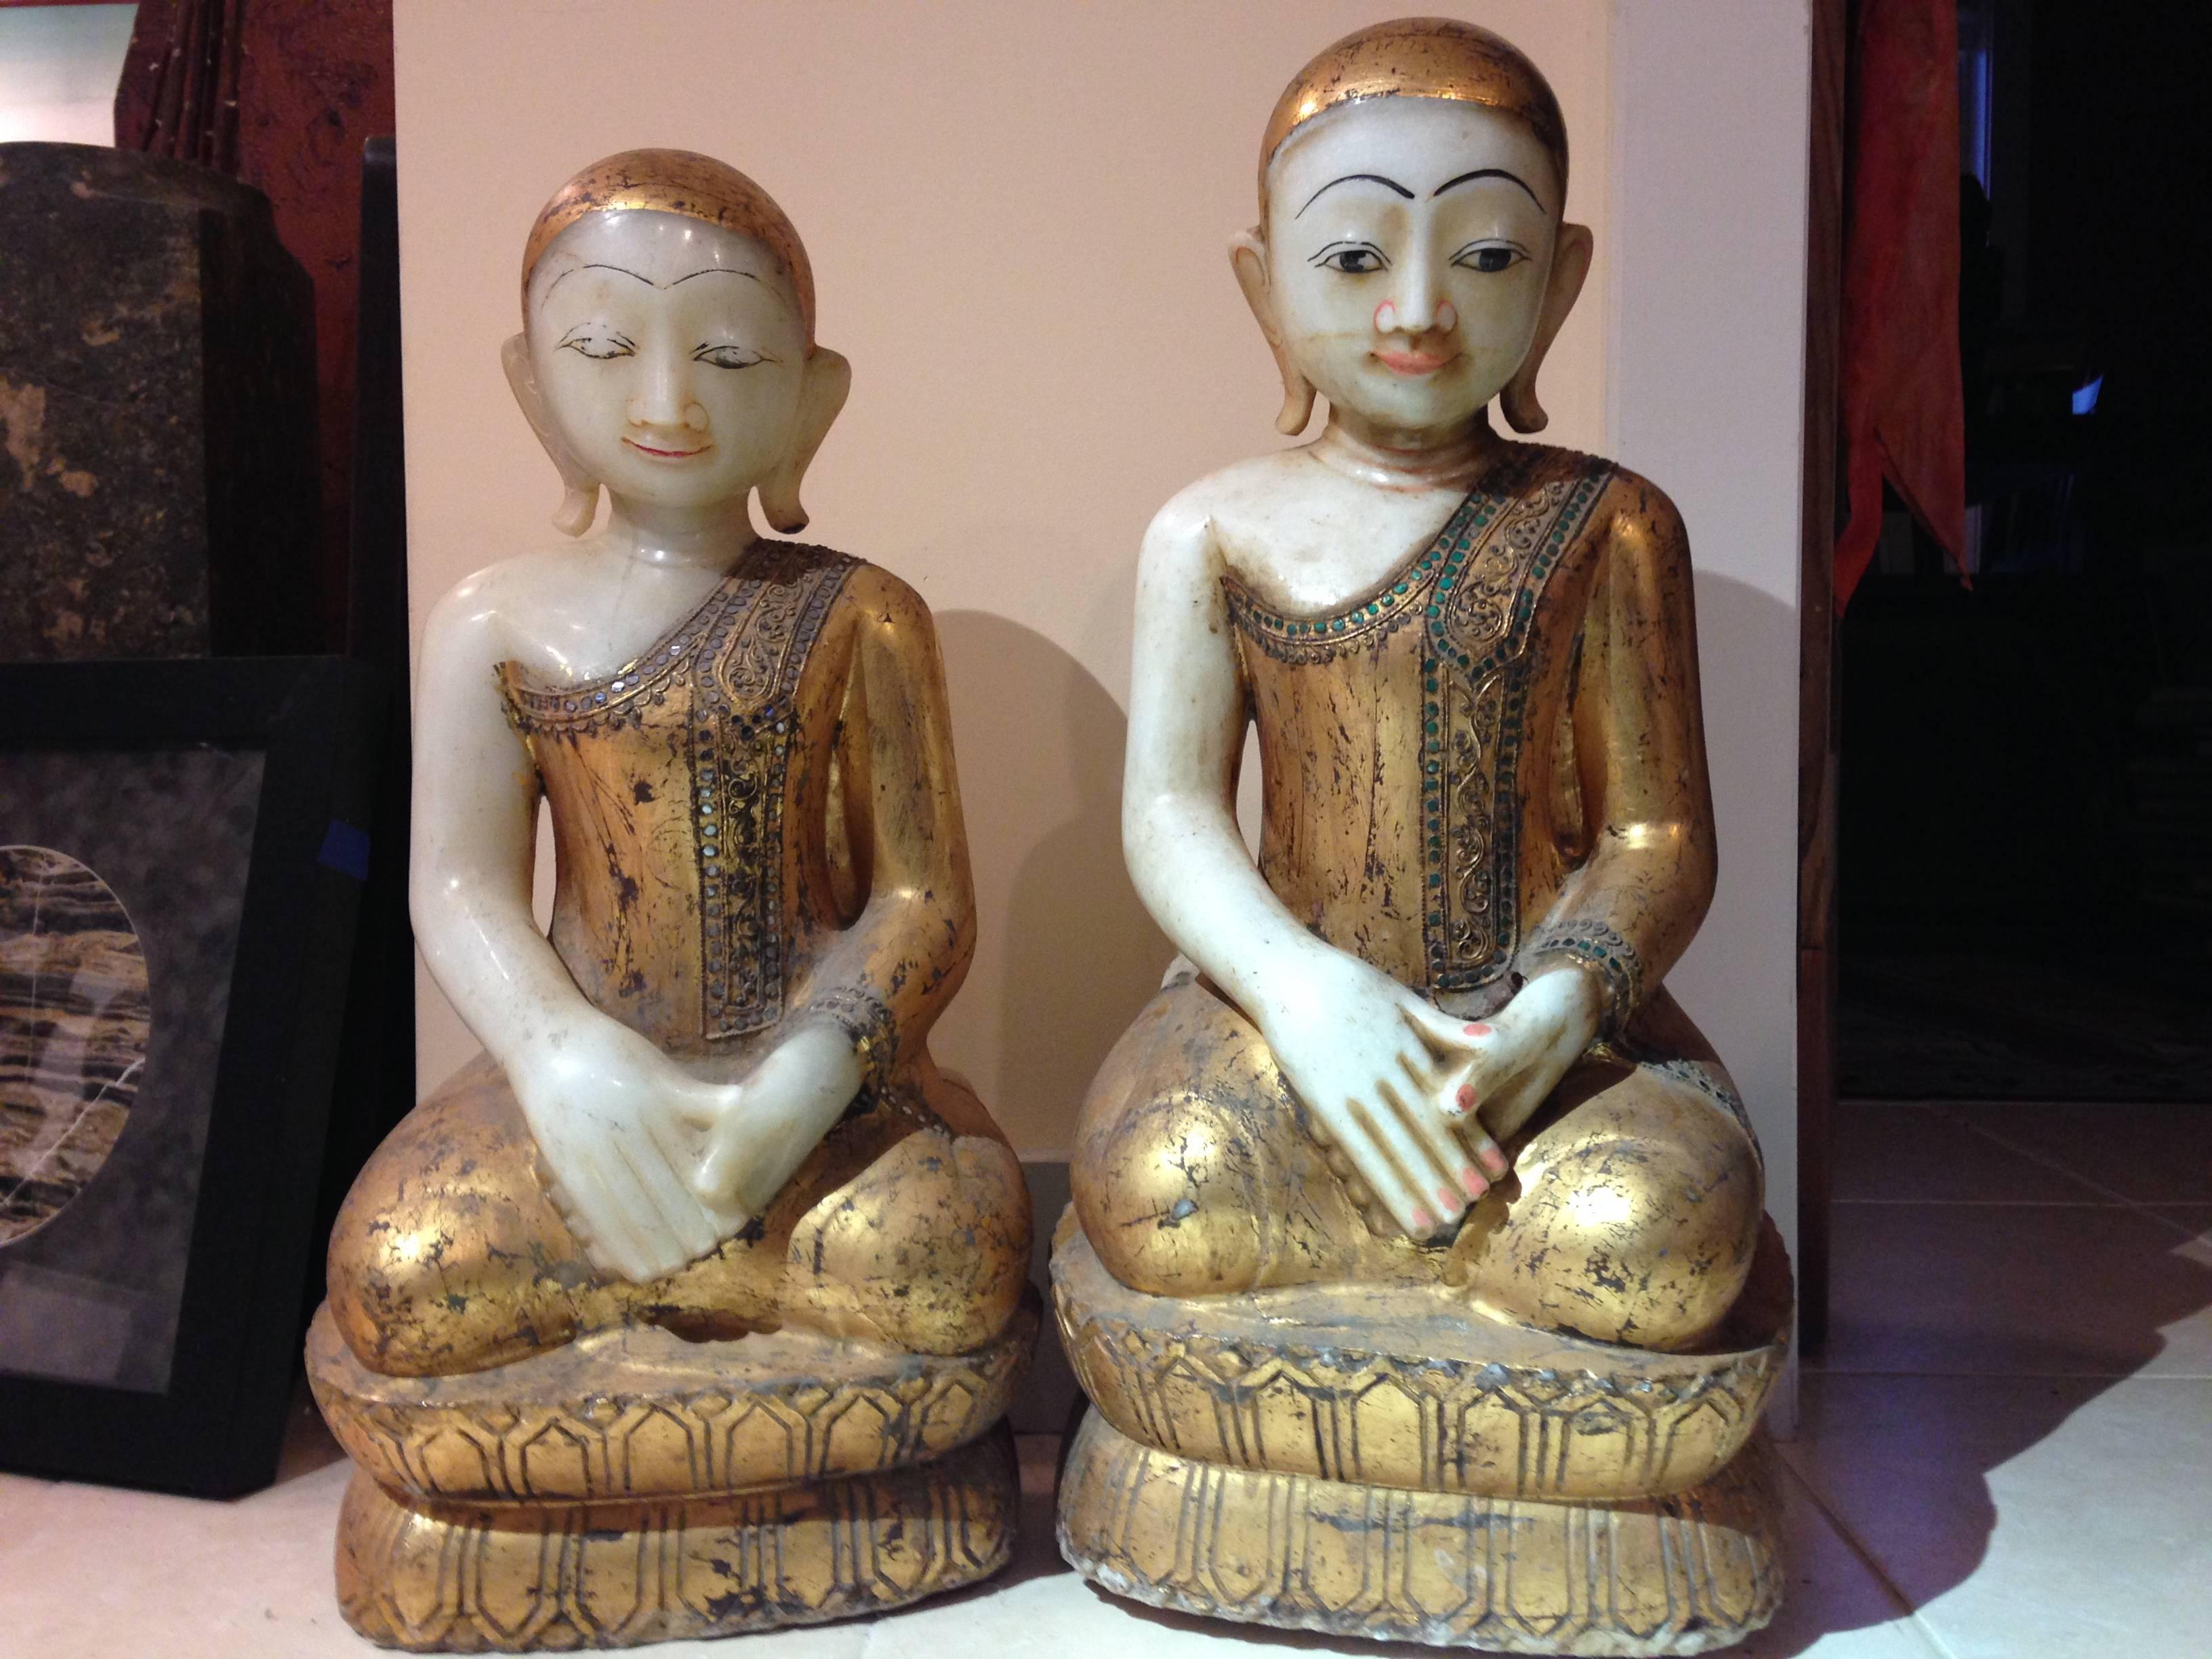 Burma, Mandalay, a pair of antique hand carved, hand lacquered , and gilt stone garden attendants in joyful pose

Superb condition

Dimensions:  Tallest is 26 inches high and 12 inches width

The joyful attendants in a worshipful pose with hands